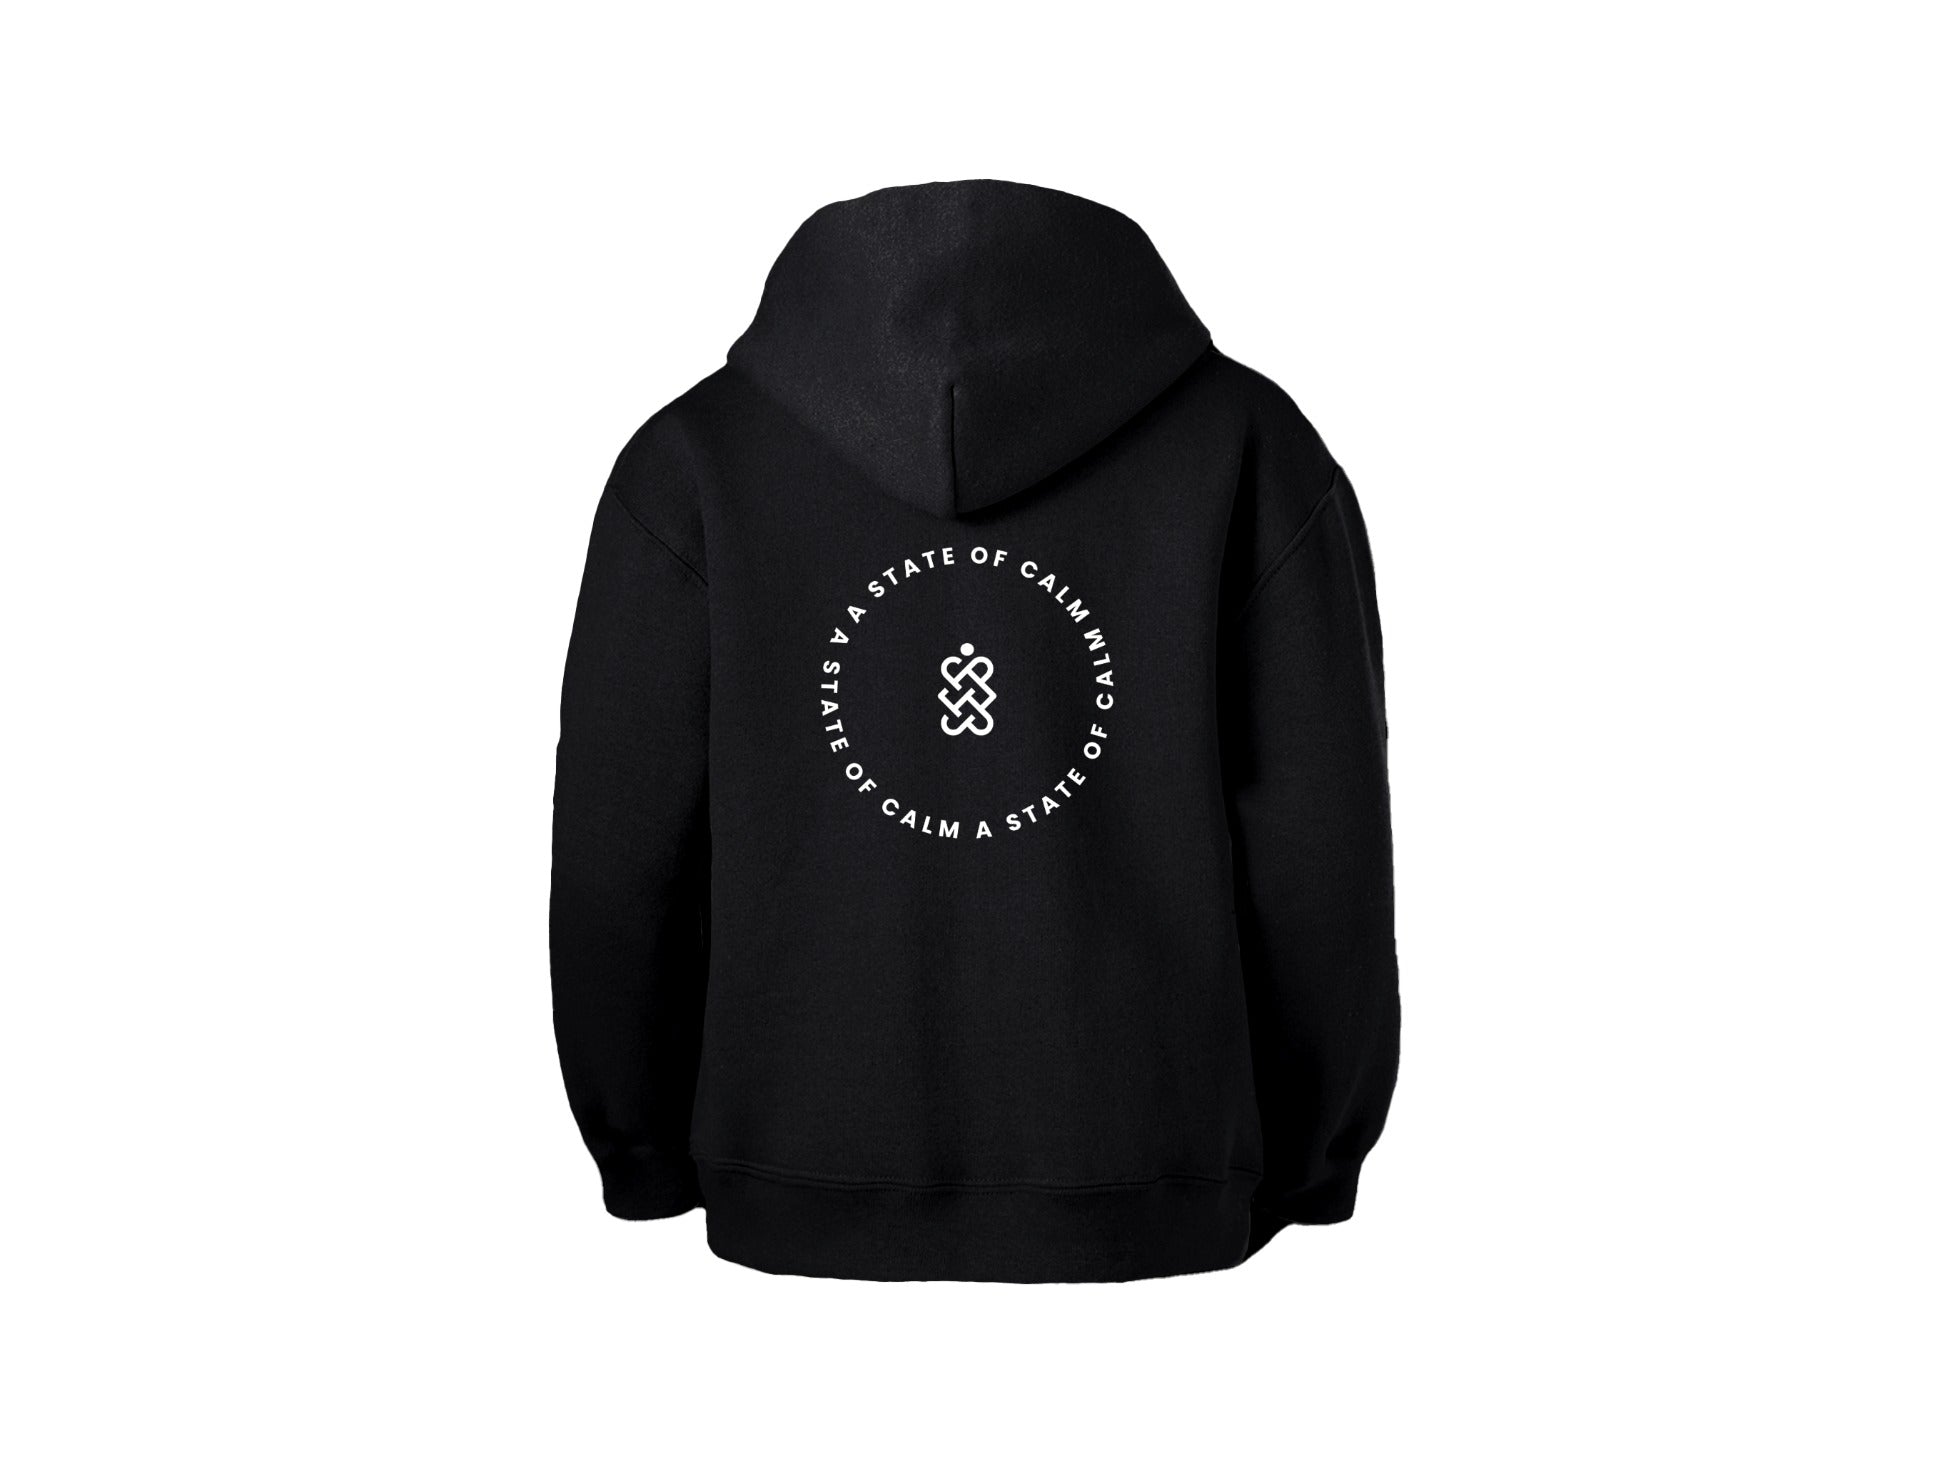 
  
  BLUE STATE OF CALM COZY COMFORTABLE HOODIES Unisex
  
